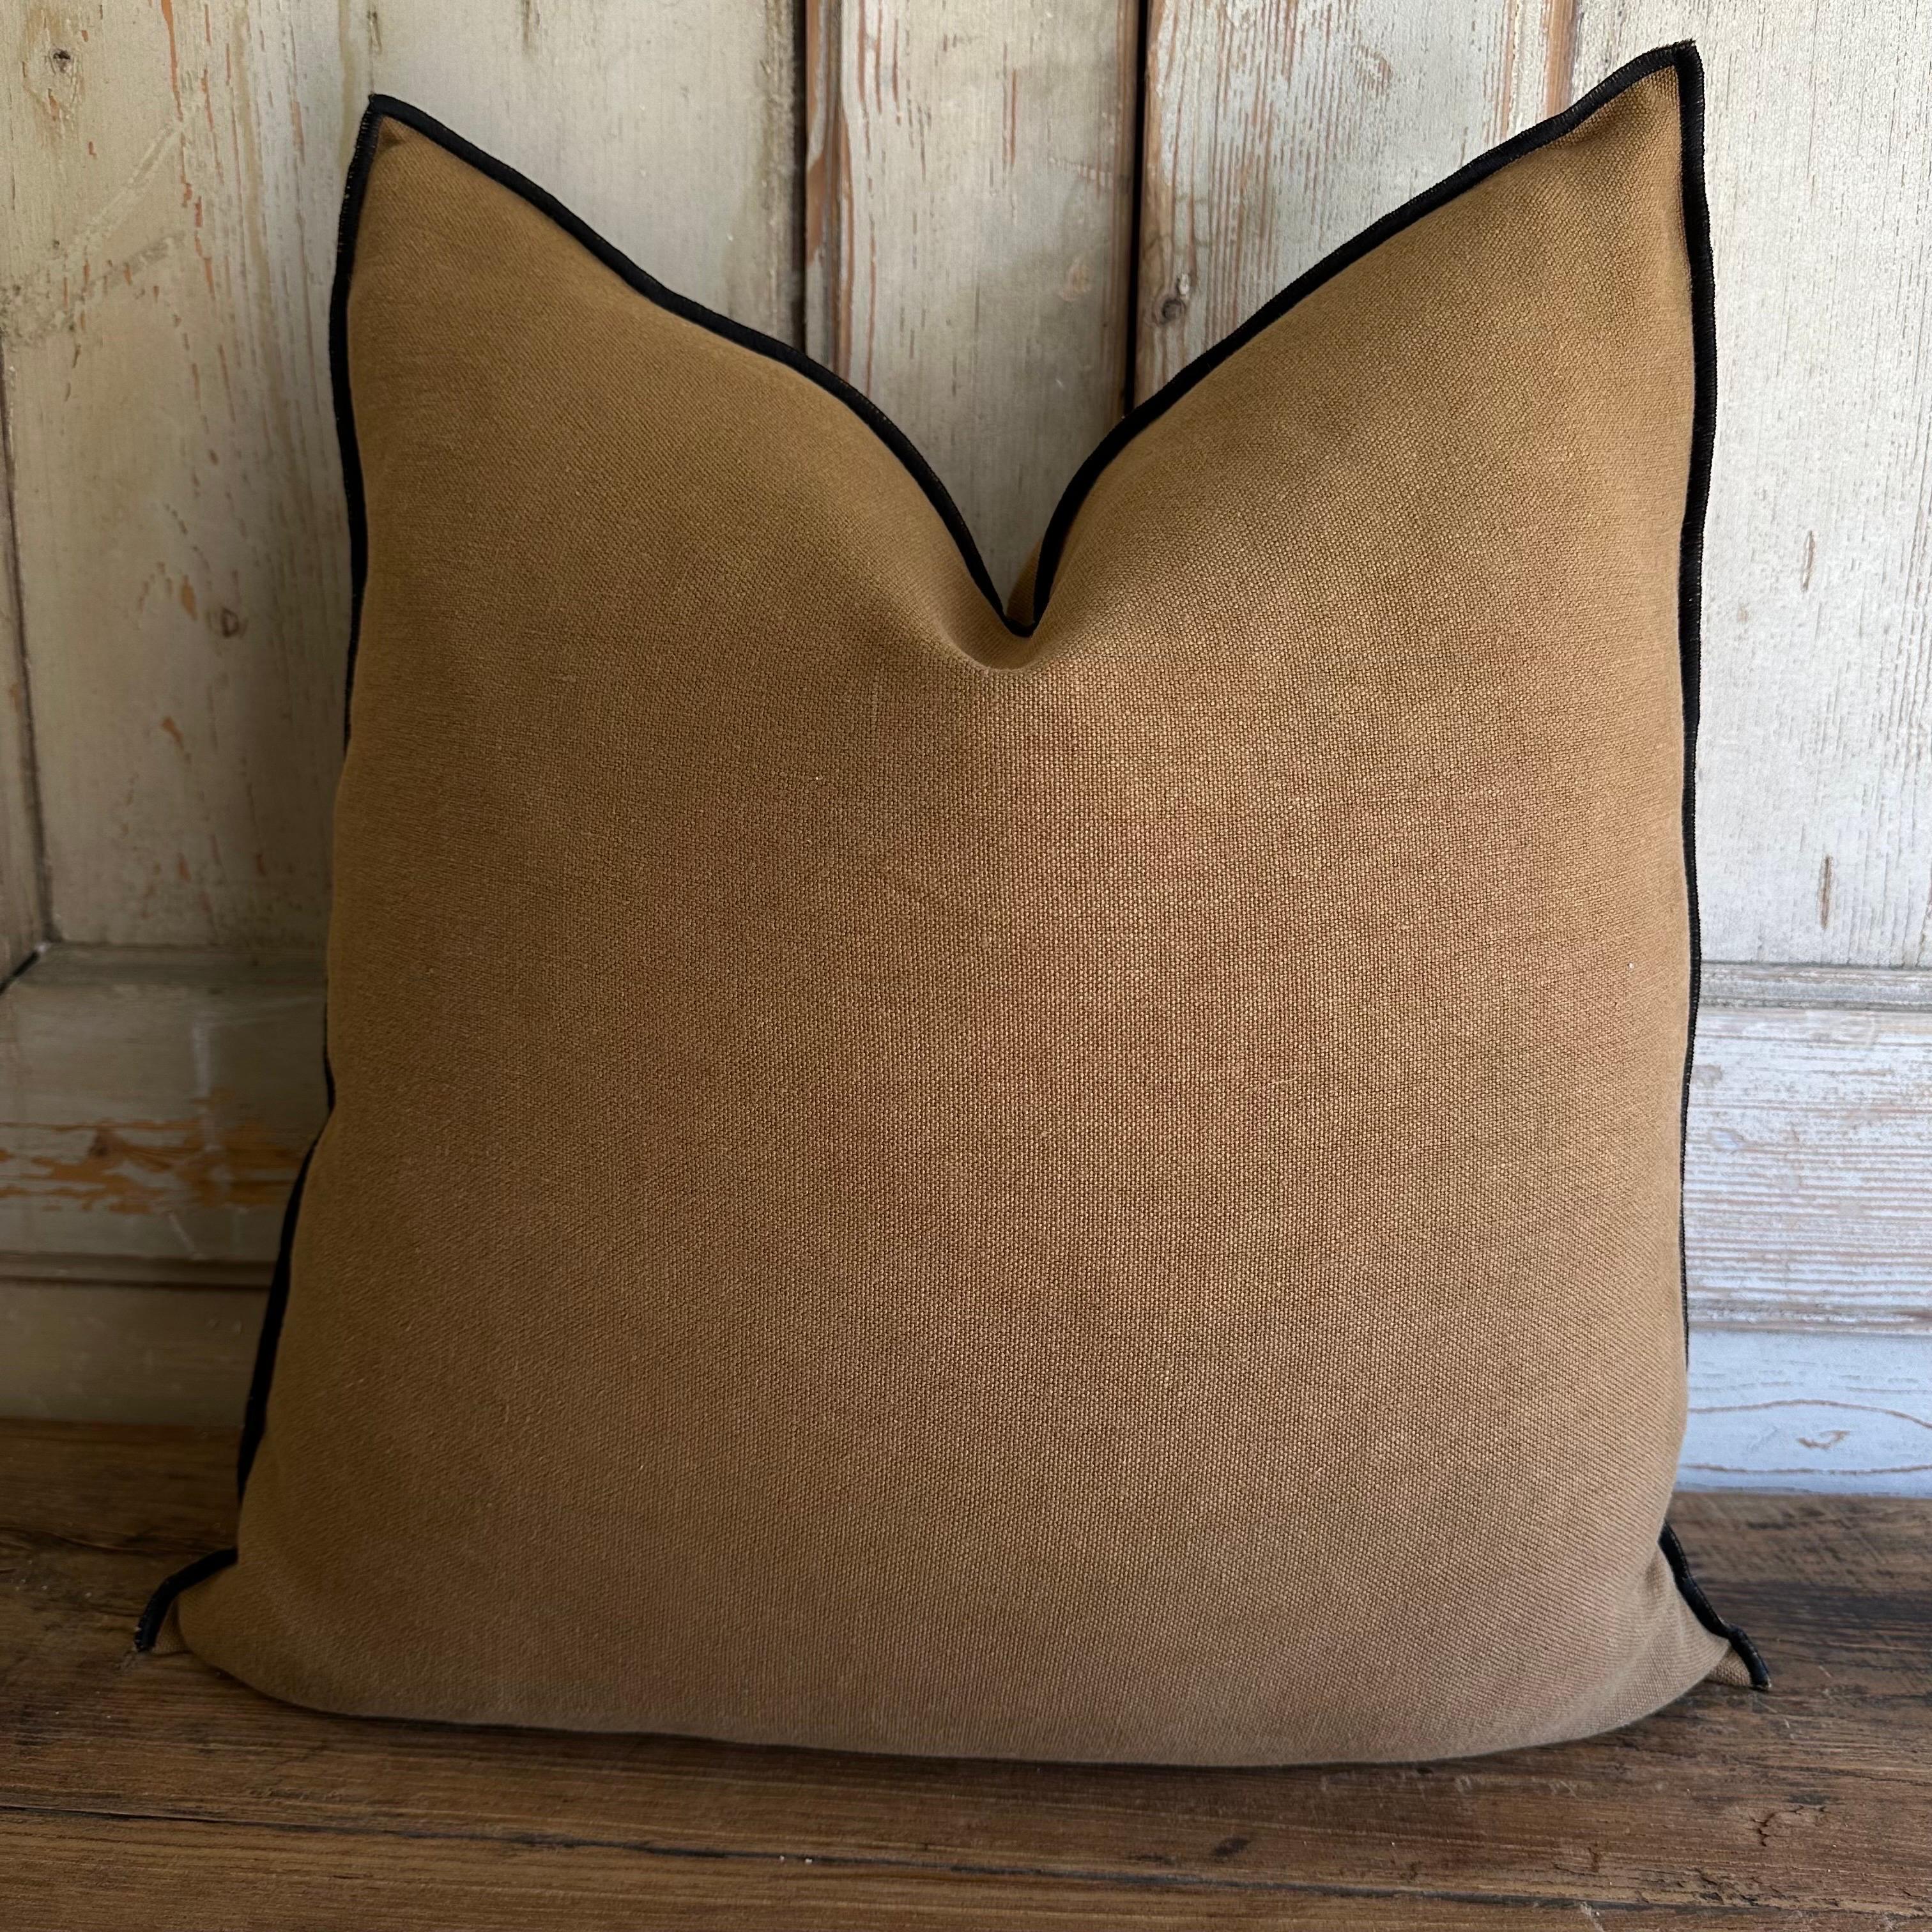 French Stone Washed Linen accent pillow with down feather insert.
Color : Havane ; a pretty warm deep brown rust color linen with textured soft hand and stitched edge, metal zipper closure. 
Size: 22